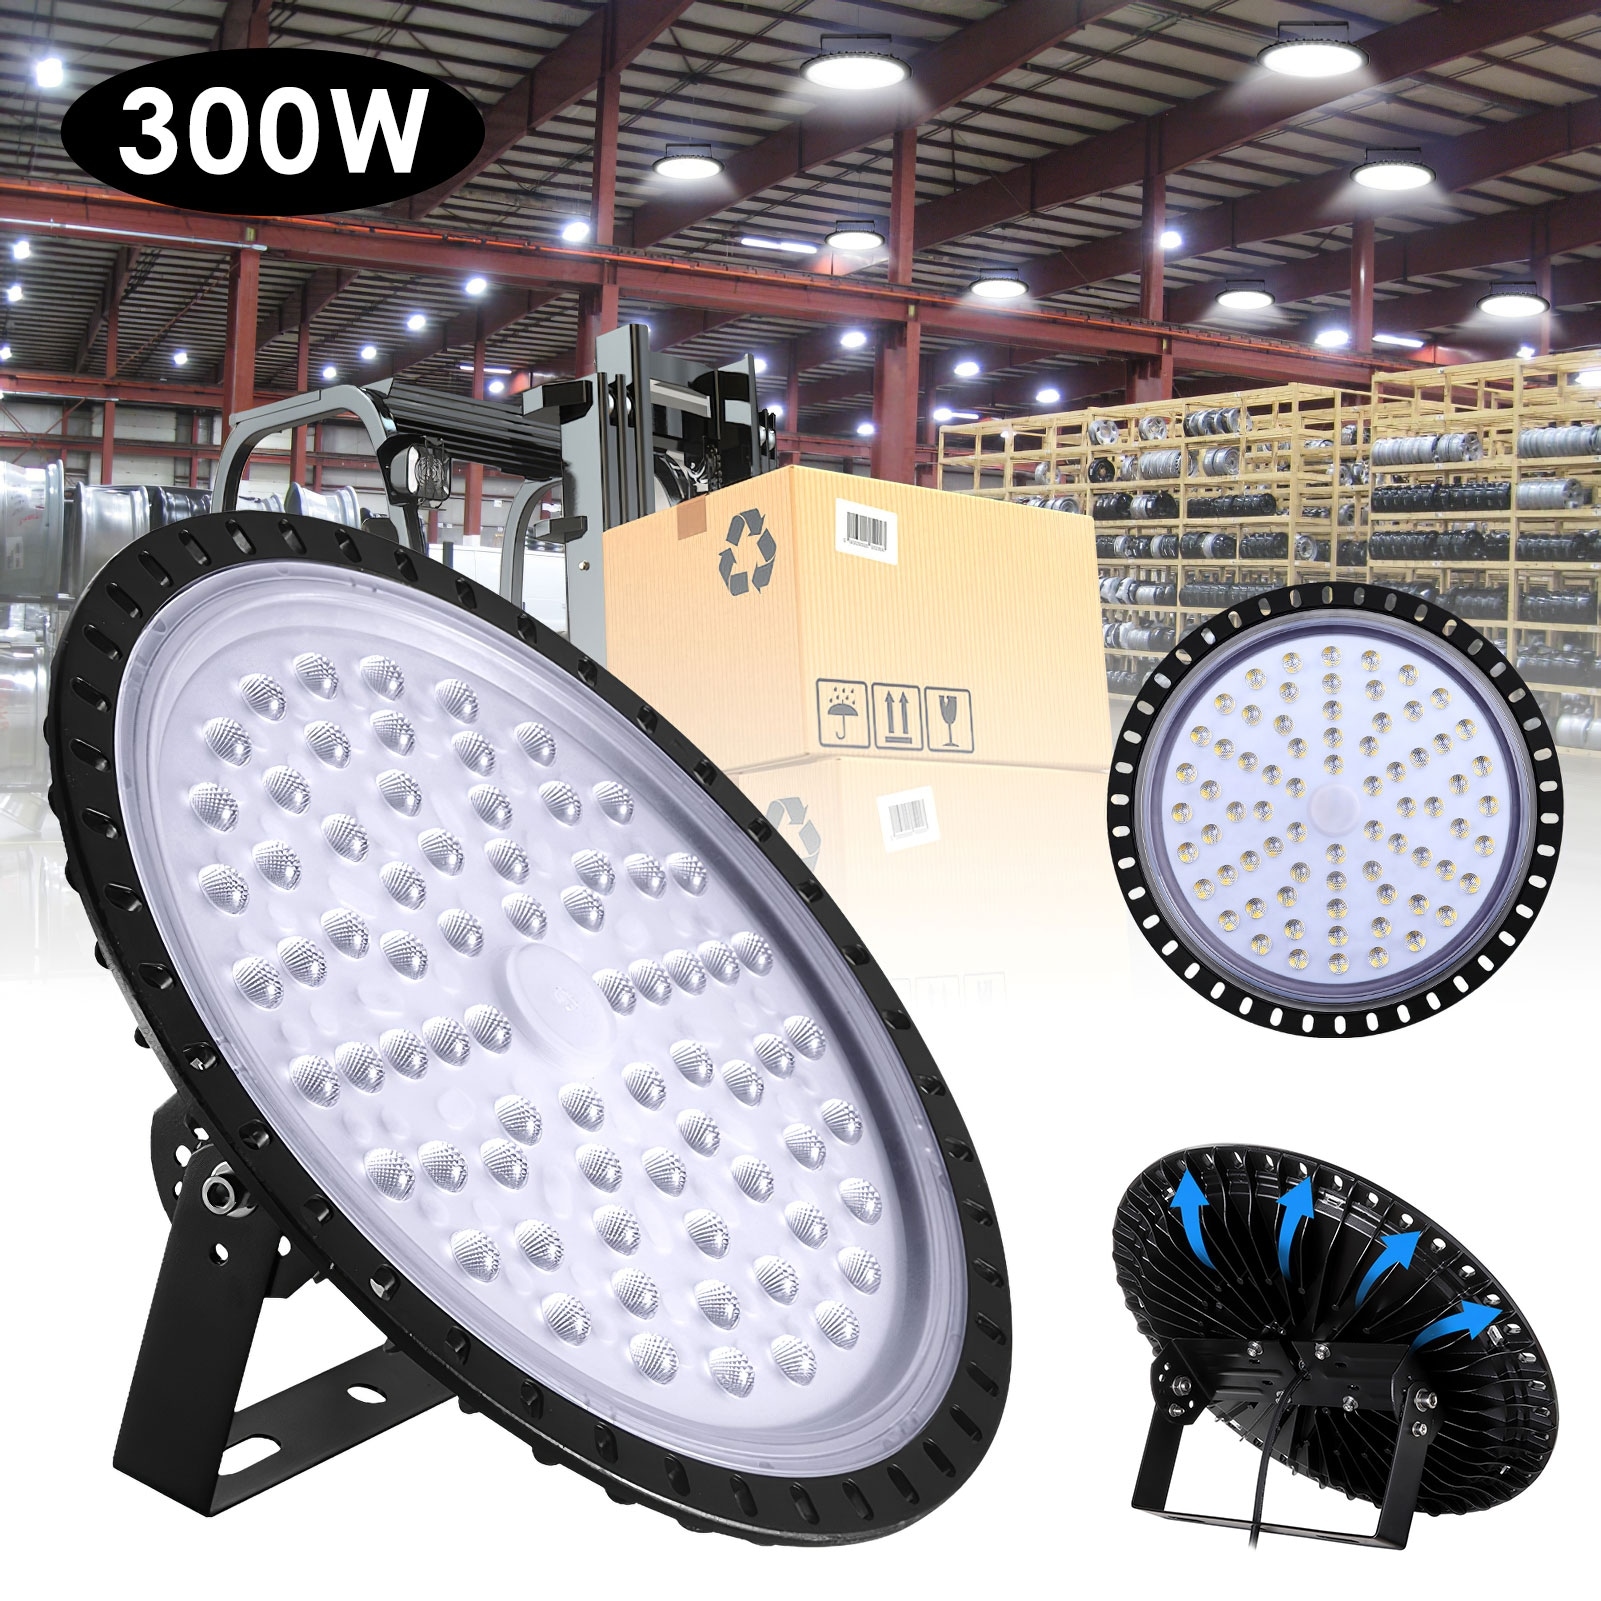 200W 20000lm UFO LED High Bay Light For Industrial Warehouse Factory Workshop 